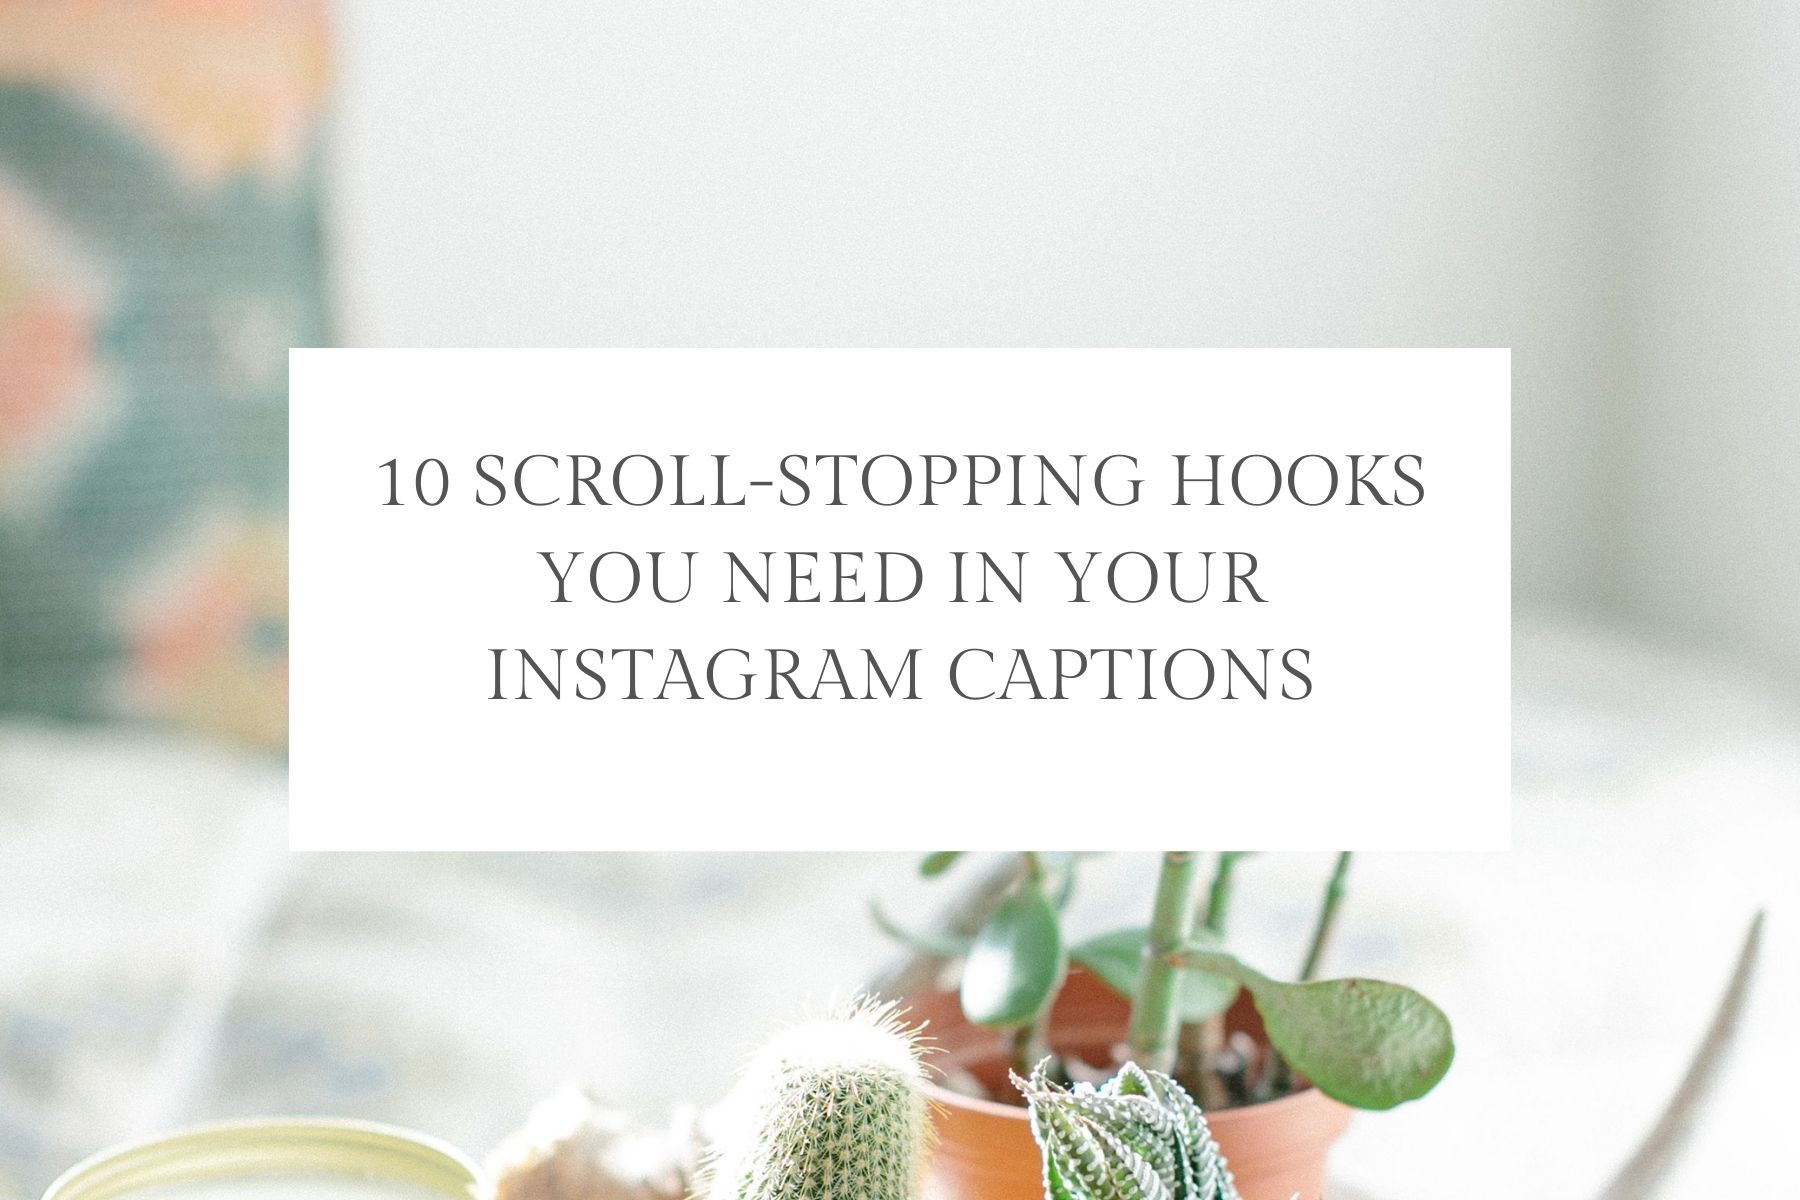 10 Scroll-Stopping Hooks You Need in Your Instagram Captions